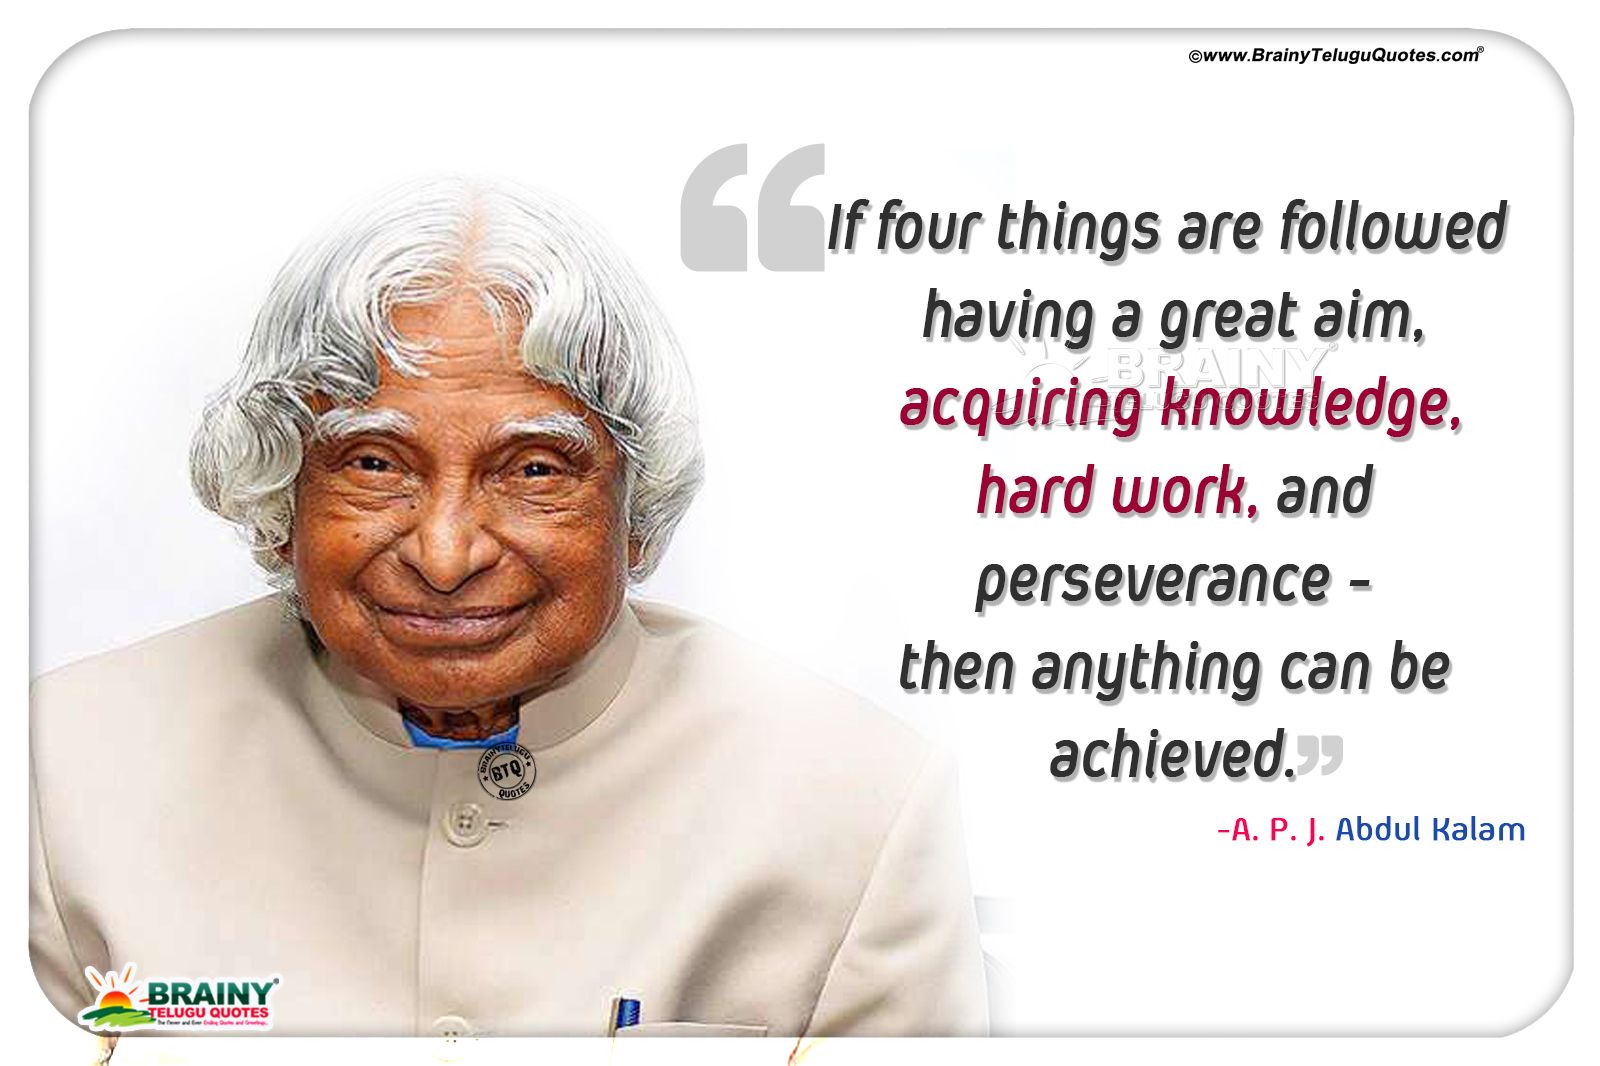 Dr A.P.J Abdul Kalam Best Motivational Sayings HD wallpaper in English. BrainyTeluguQuotes.comTelugu quotes. English quotes. Hindi quotes. Tamil quotes. Greetings